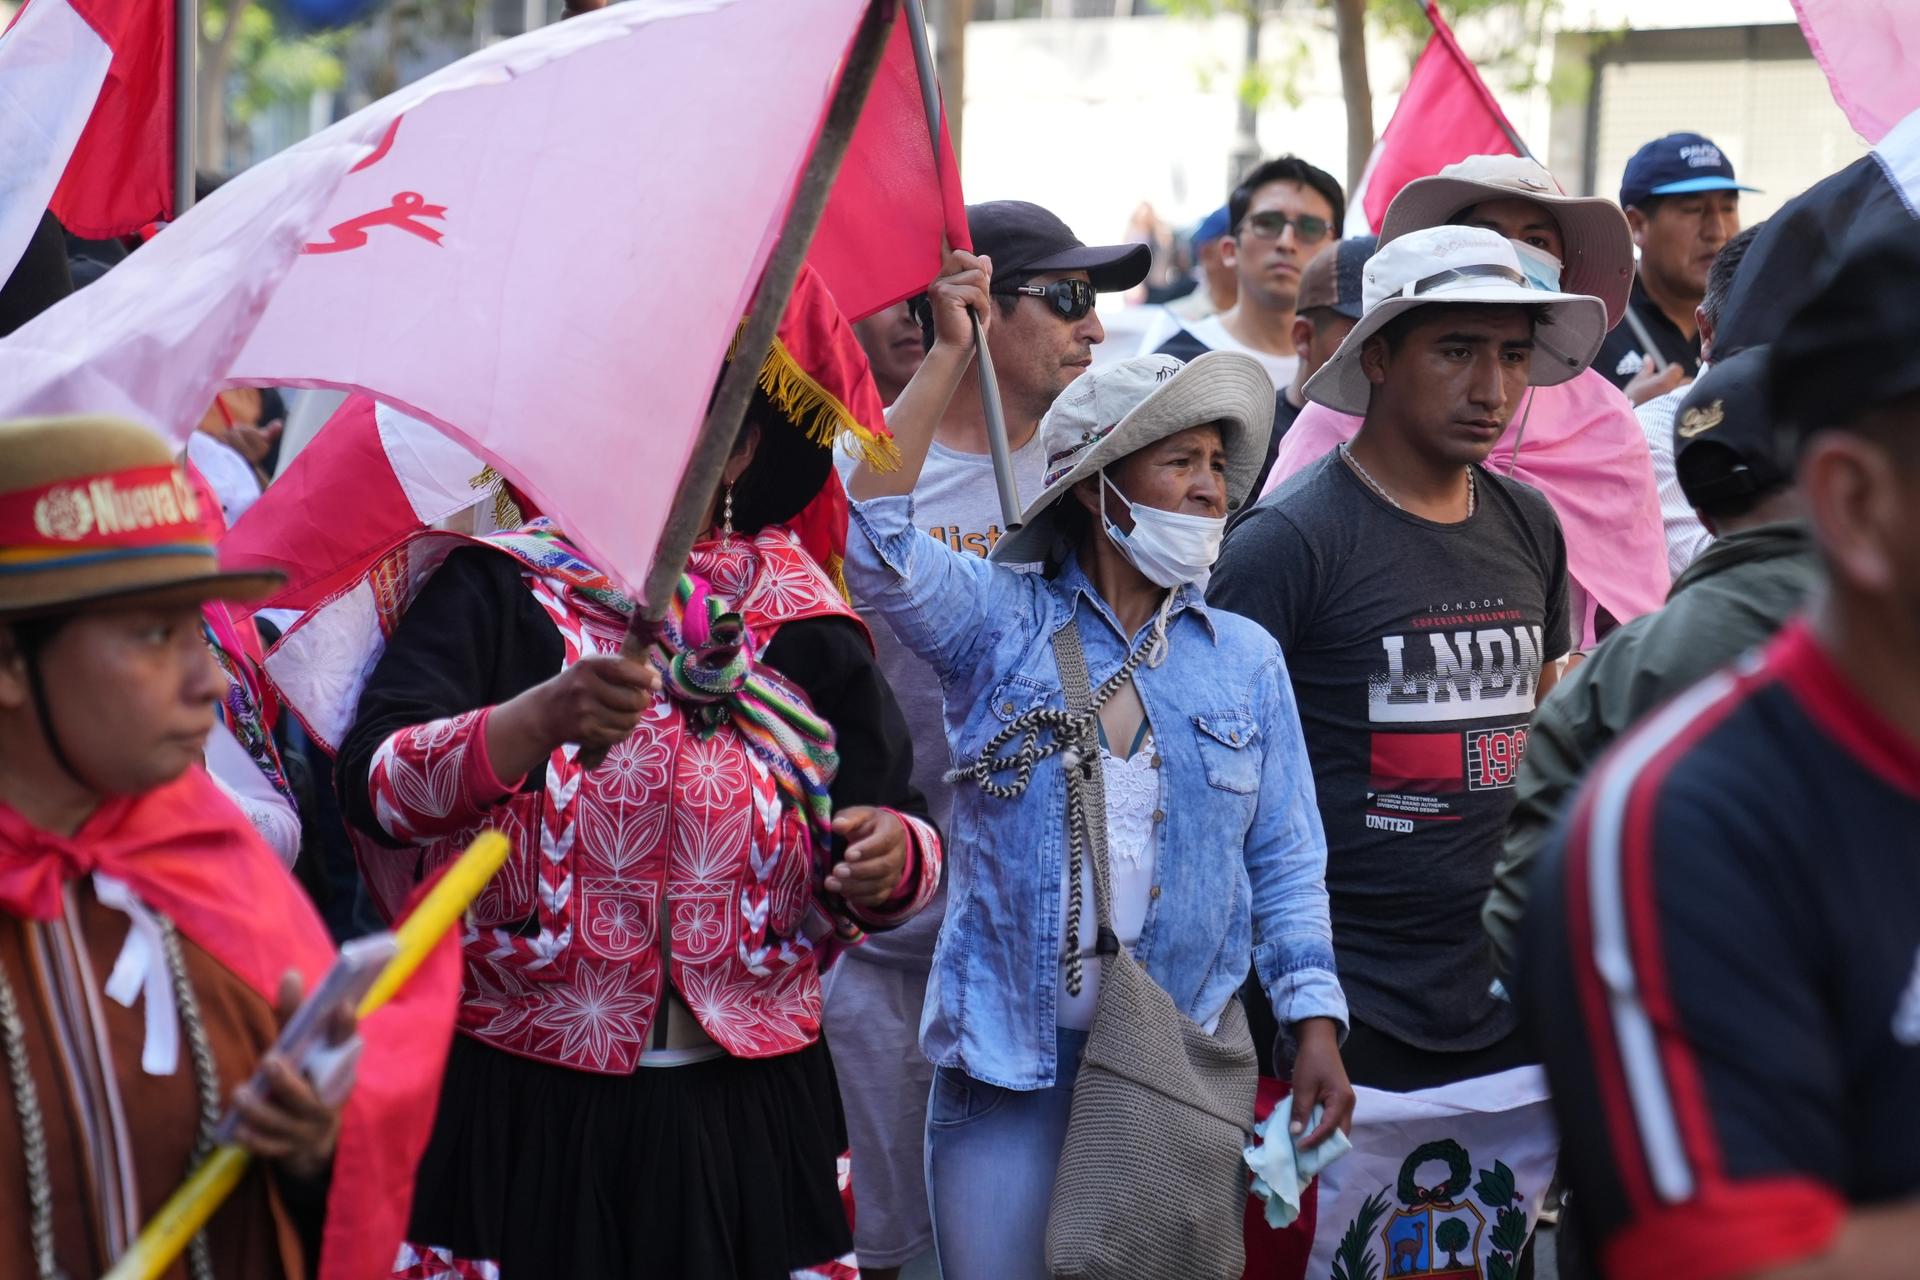 Thousands of people from Peru's southern highlands march through the streets of the capital Lima, calling for President Dina Boluarte's resignation